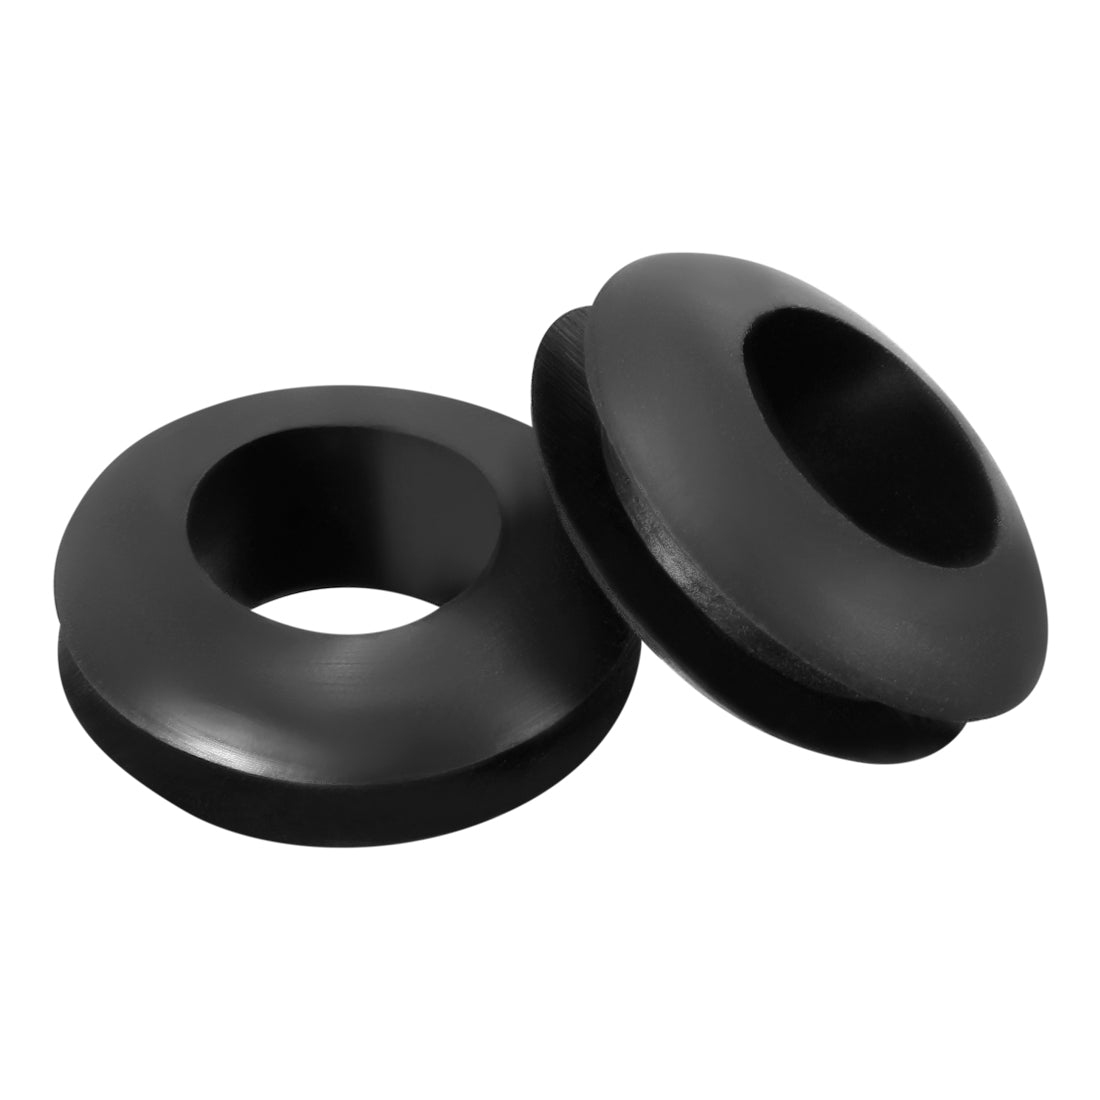 Uxcell Uxcell Wire Protector Oil Resistant Armature Rubber Grommet 18mm Inner Dia 300Pcs Black